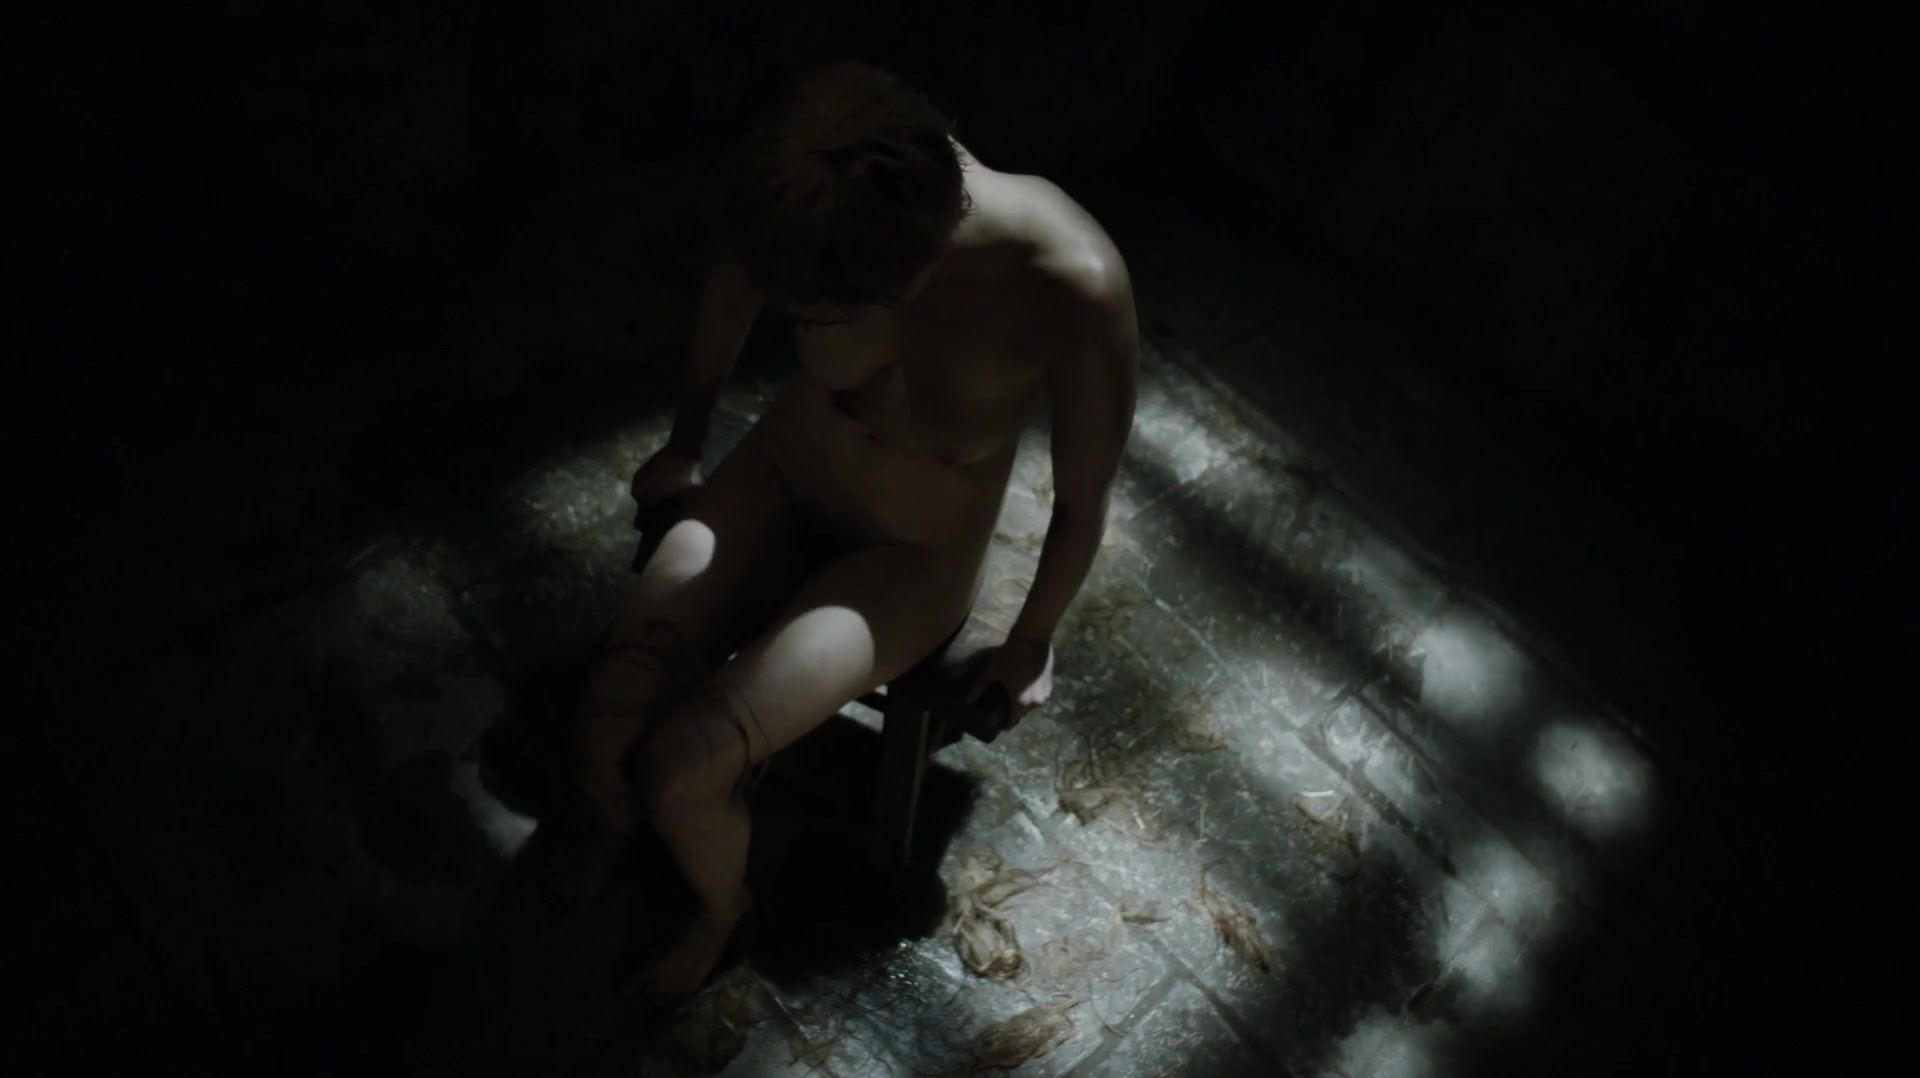 Squirt Nude TV show scene | Lena Headey Full Frontal - GAME OF THRONES s05e10 (2015) Breasts